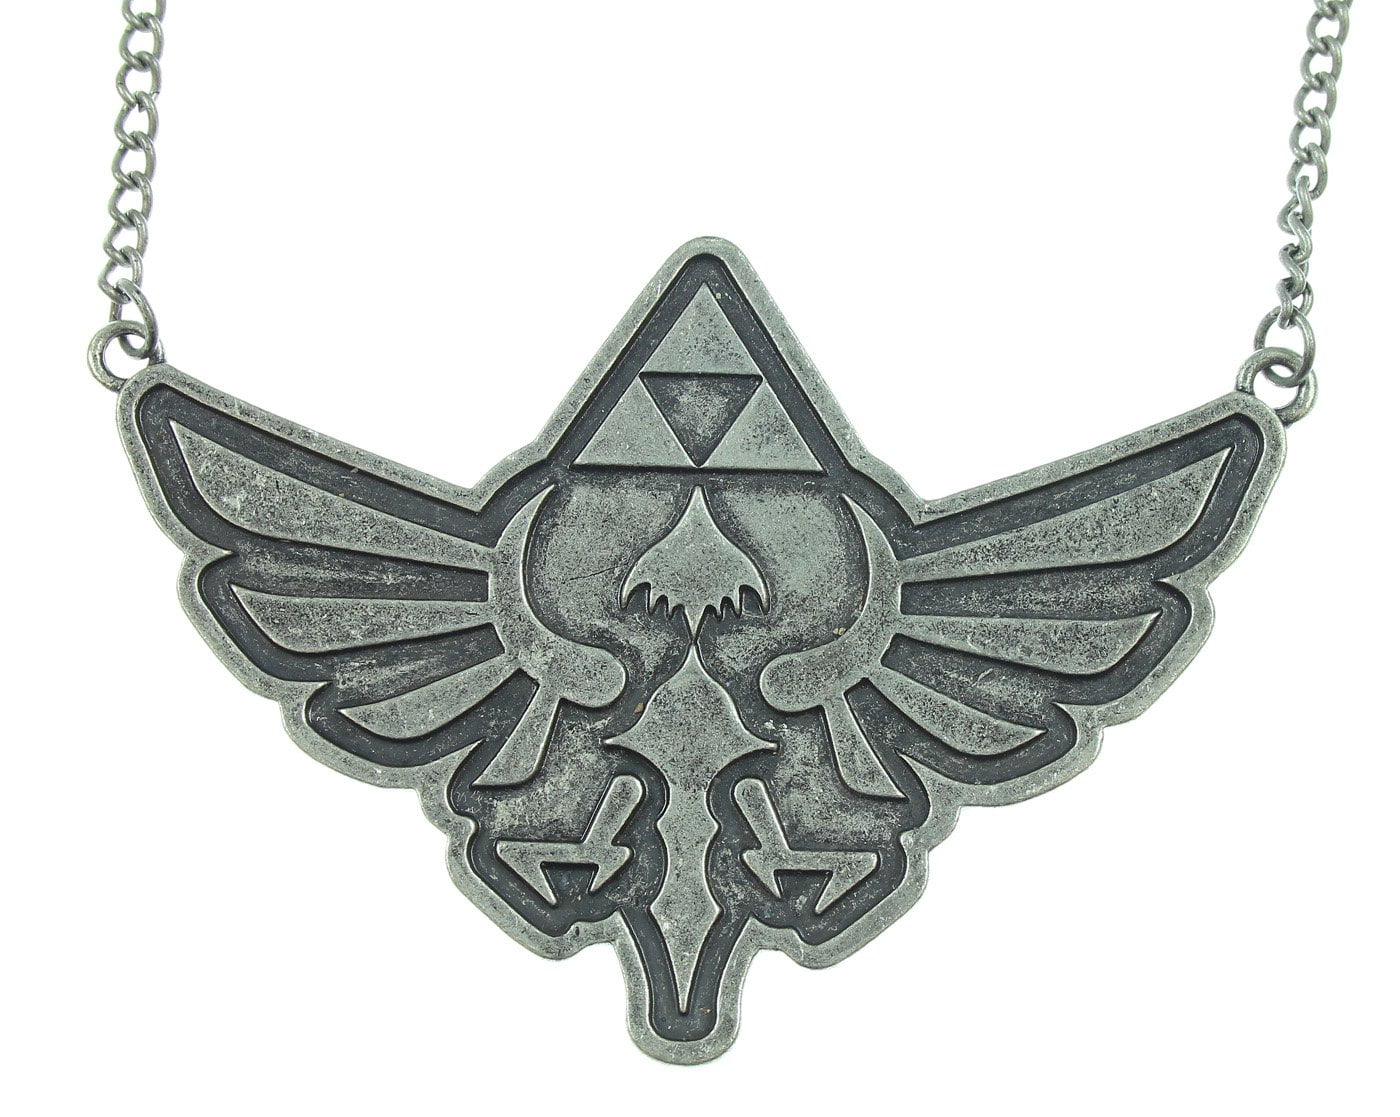 Legend of Zelda Necklace Fairy in a bottle. (They Glow in the dark!) · Owen  and Stad · Online Store Powered by Storenvy